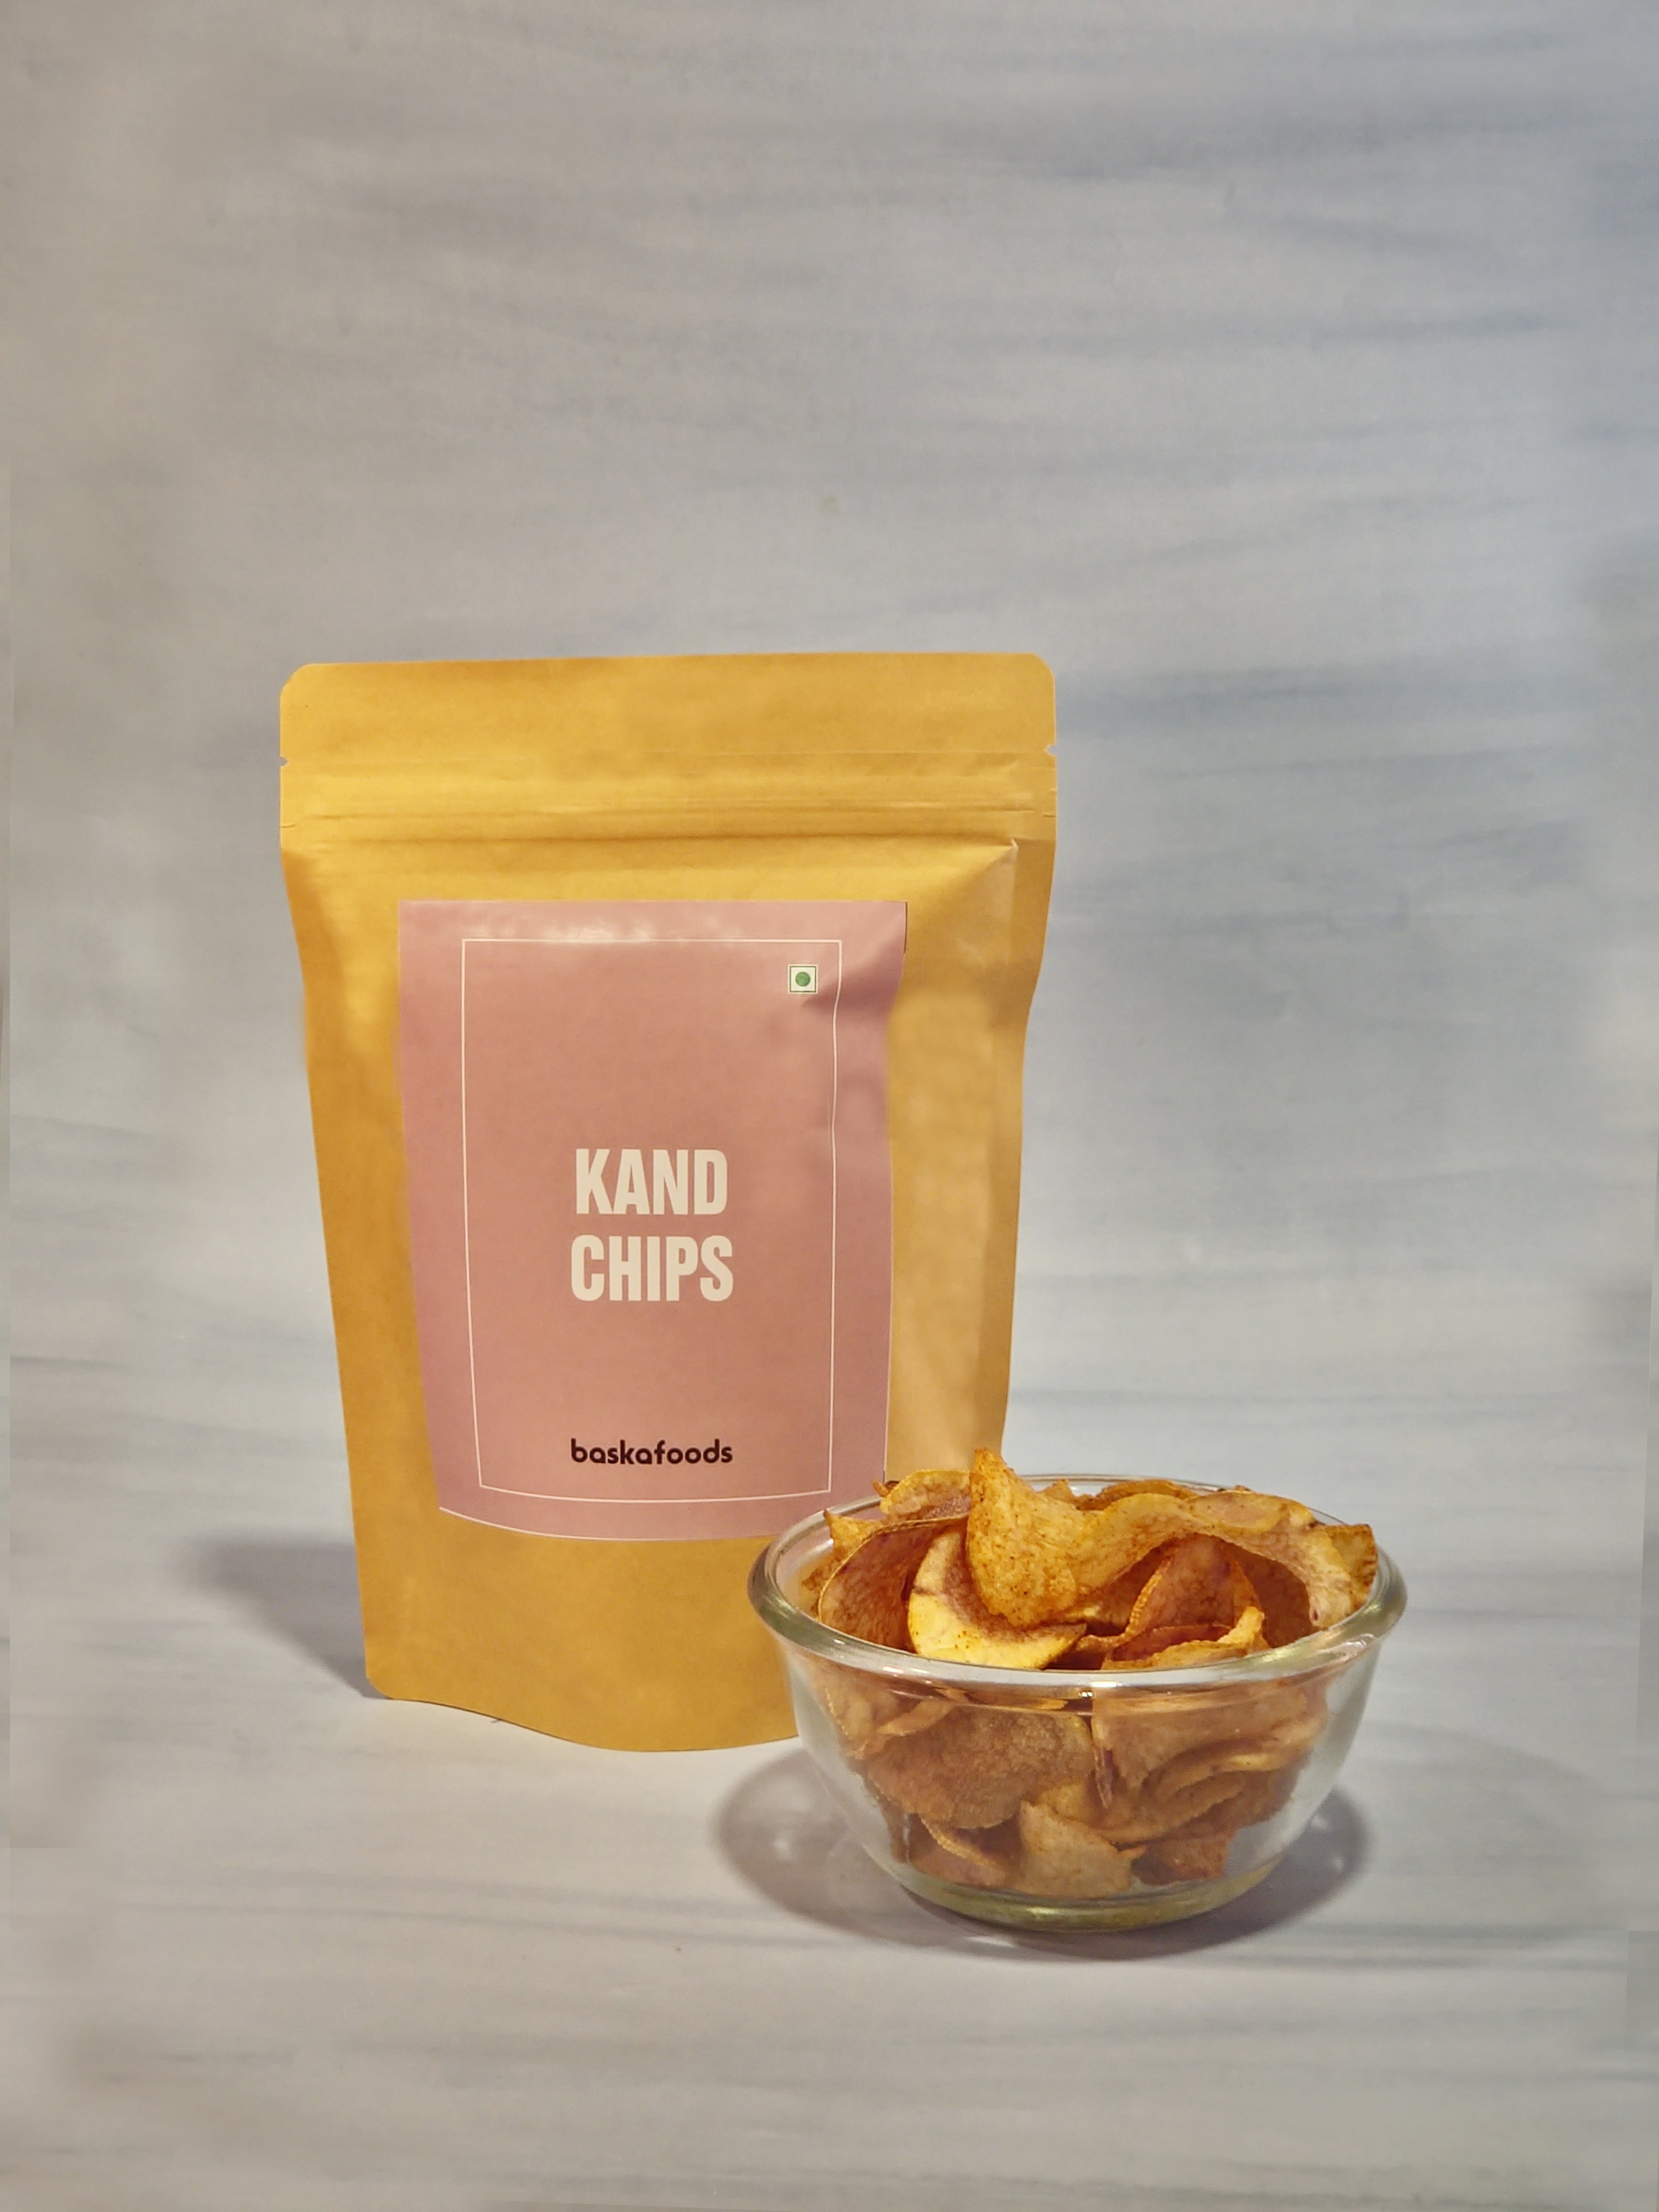 Kand Chips